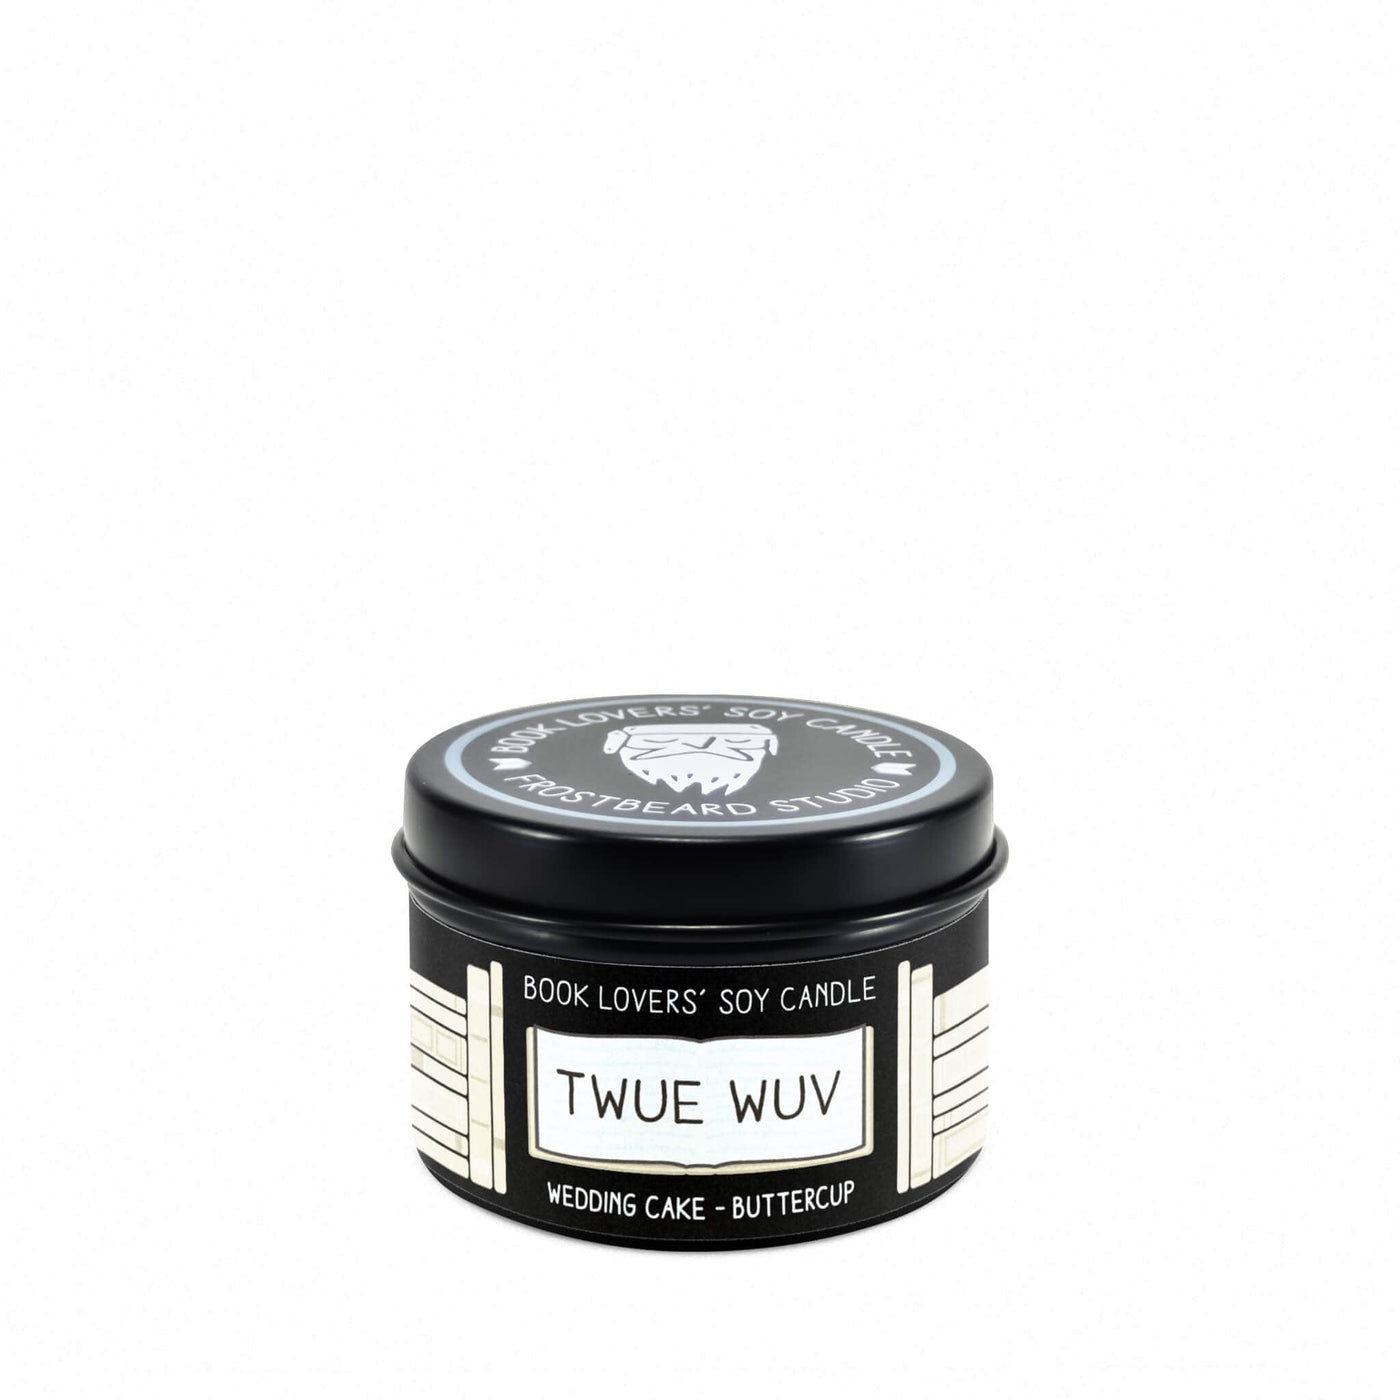 Twue Wuv - 2 oz Tin - Book Lovers' Soy Candle - Frostbeard Studio